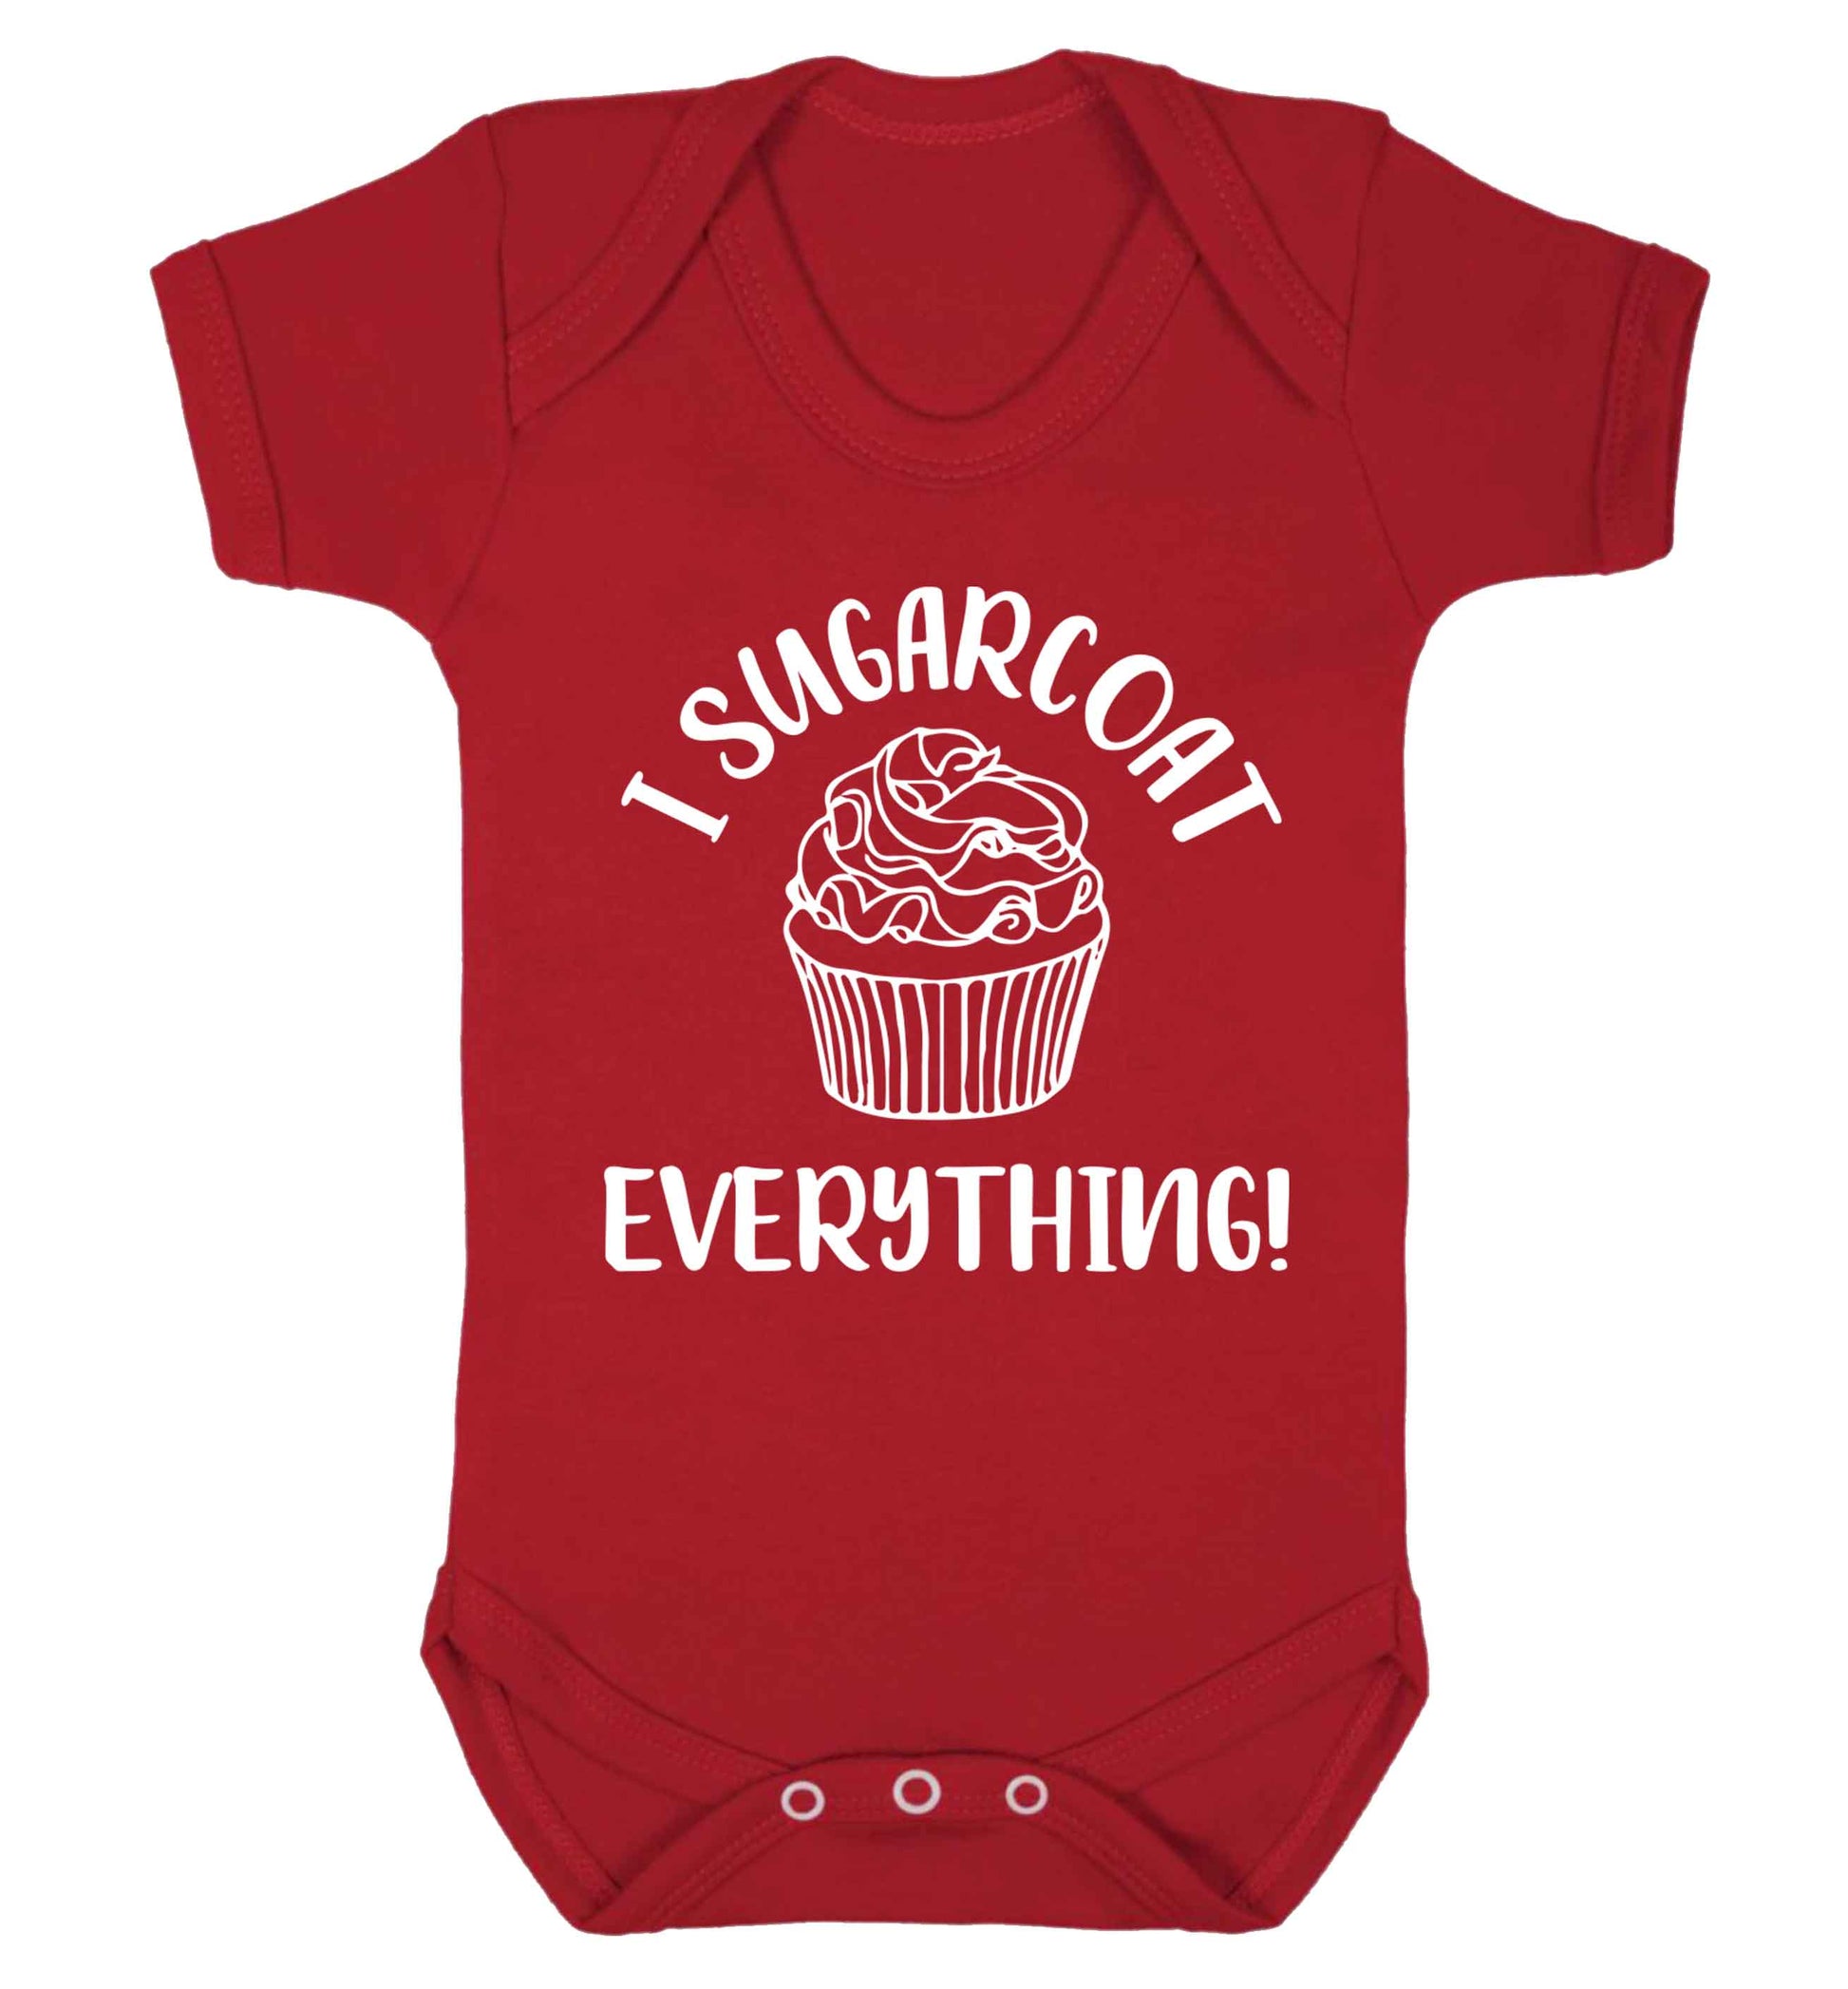 I sugarcoat everything Baby Vest red 18-24 months